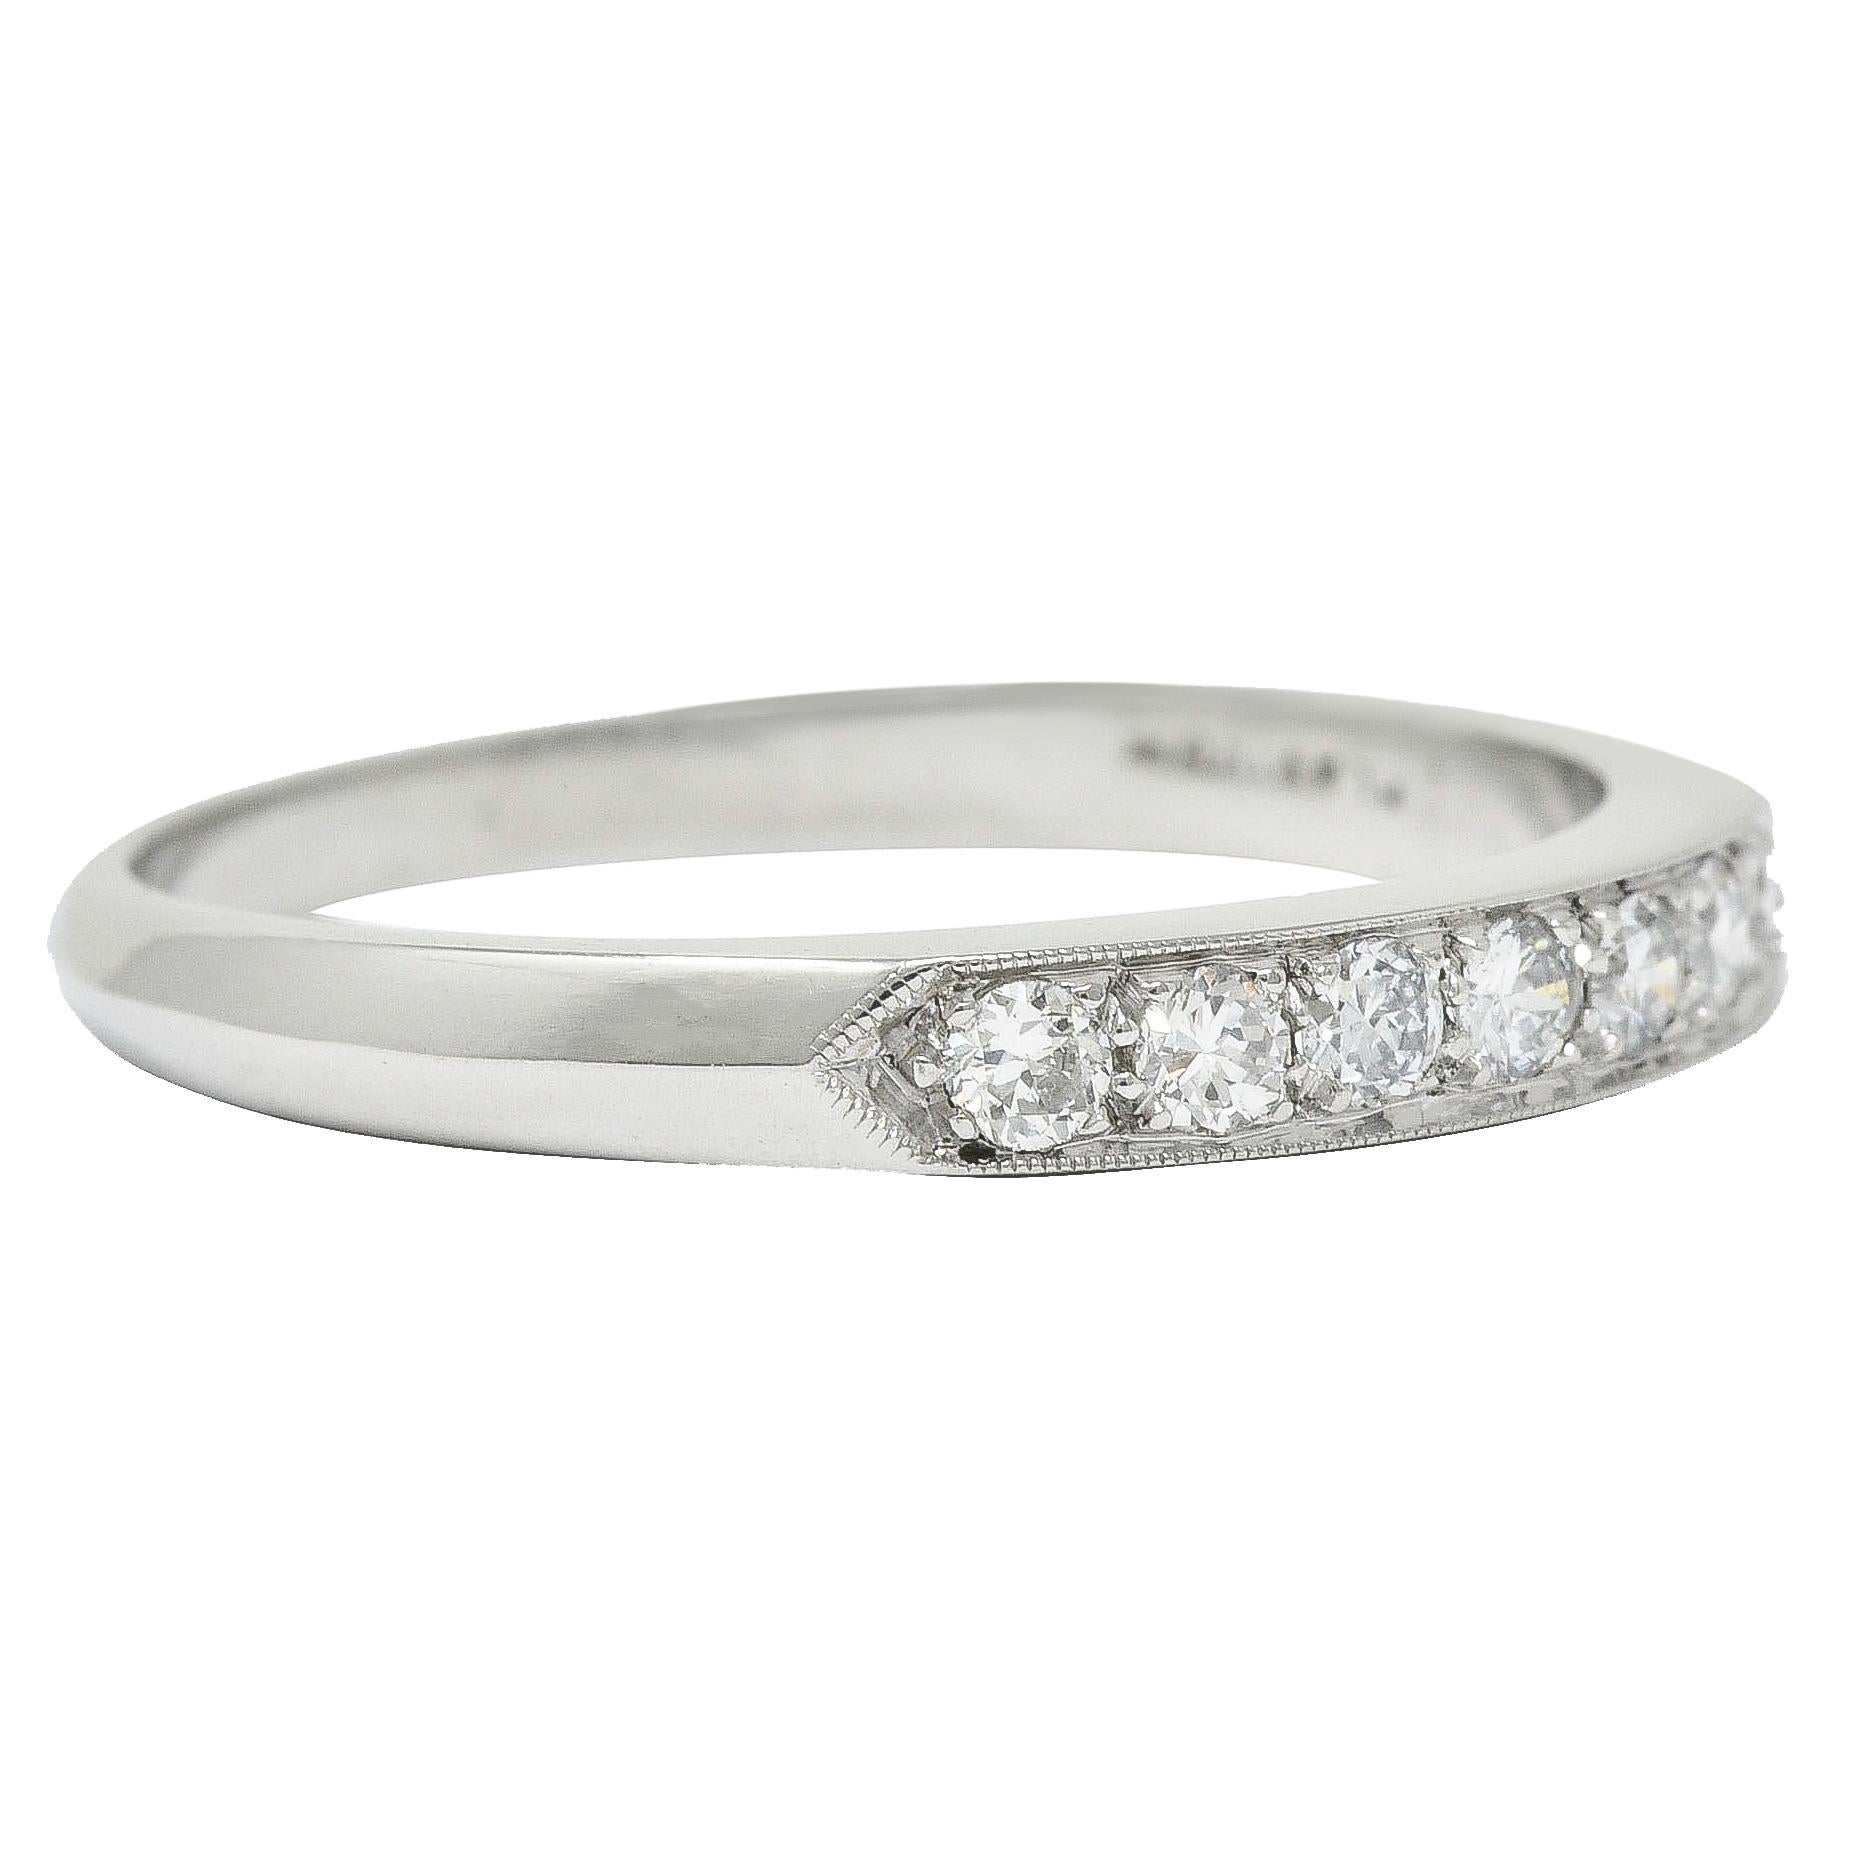 Band ring is set to front by seven round brilliant cut diamonds

Weighing in total approximately 0.25 carat with H to K color and VS clarity

Bead set in a recessed channel with pointed shoulders and a milgrain edge

Completed by a subtle knife